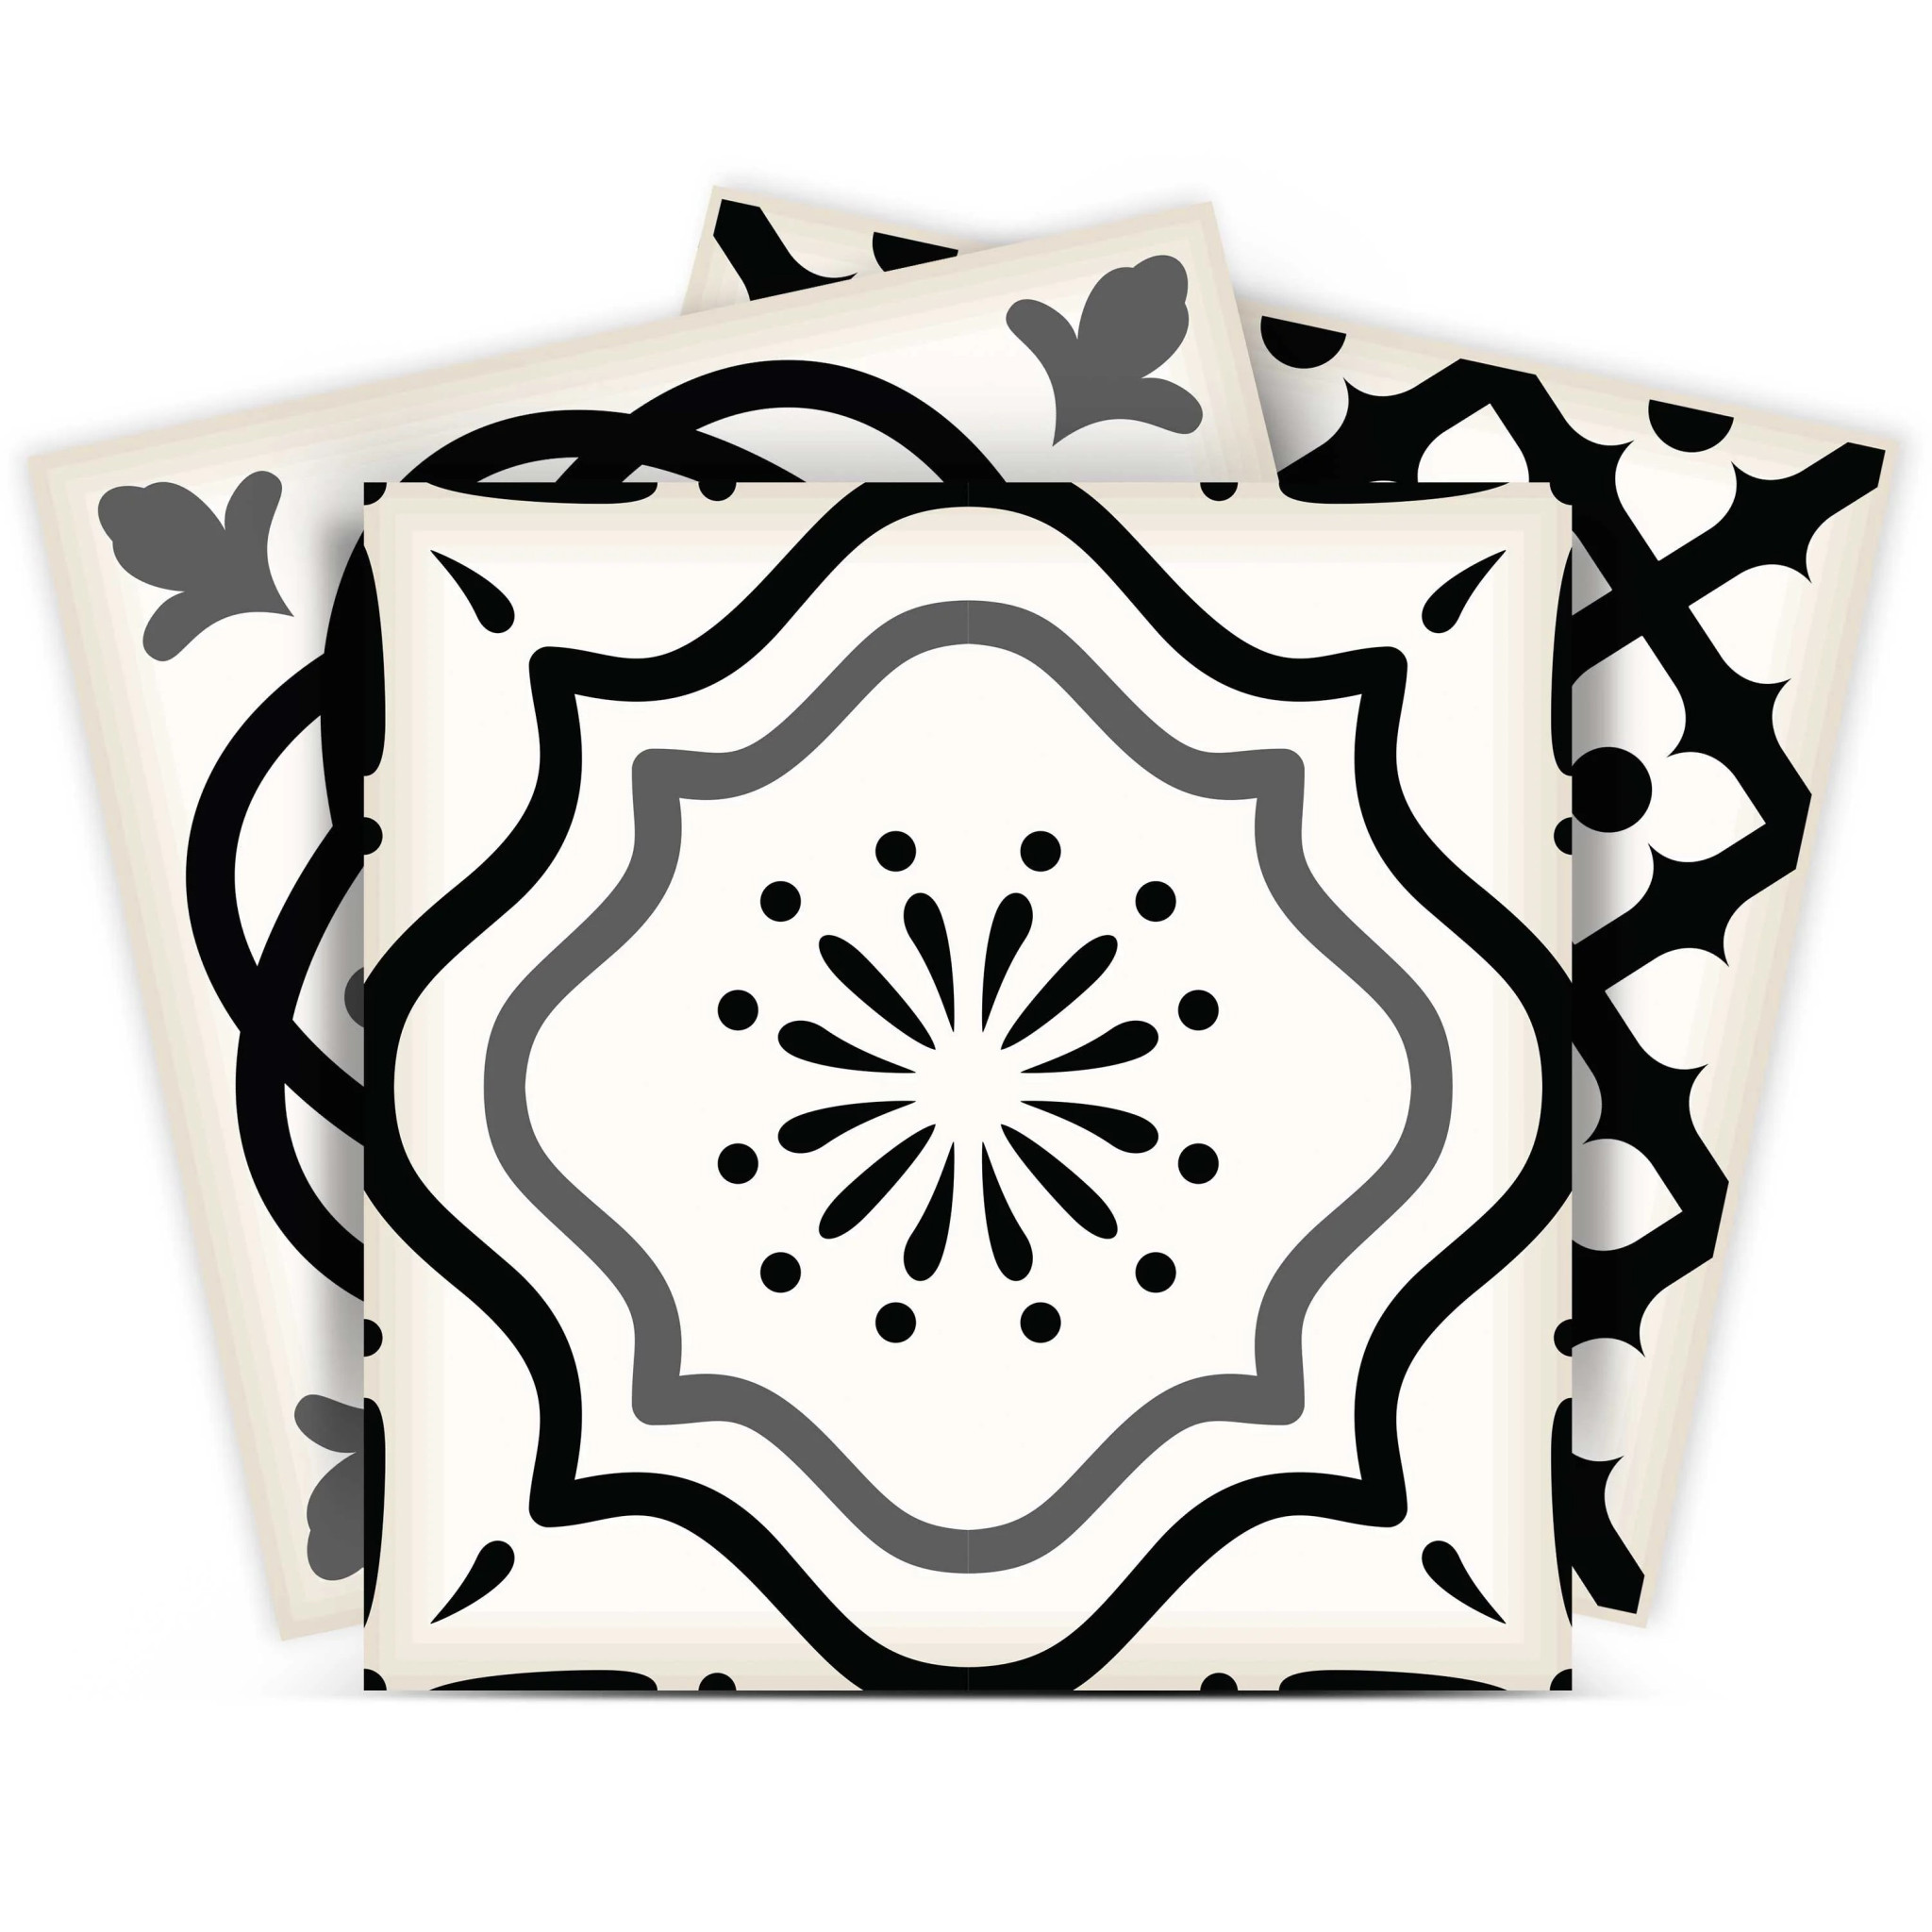 6" X 6" Black and White Multi  Peel and Stick Removable Tiles-399862-1